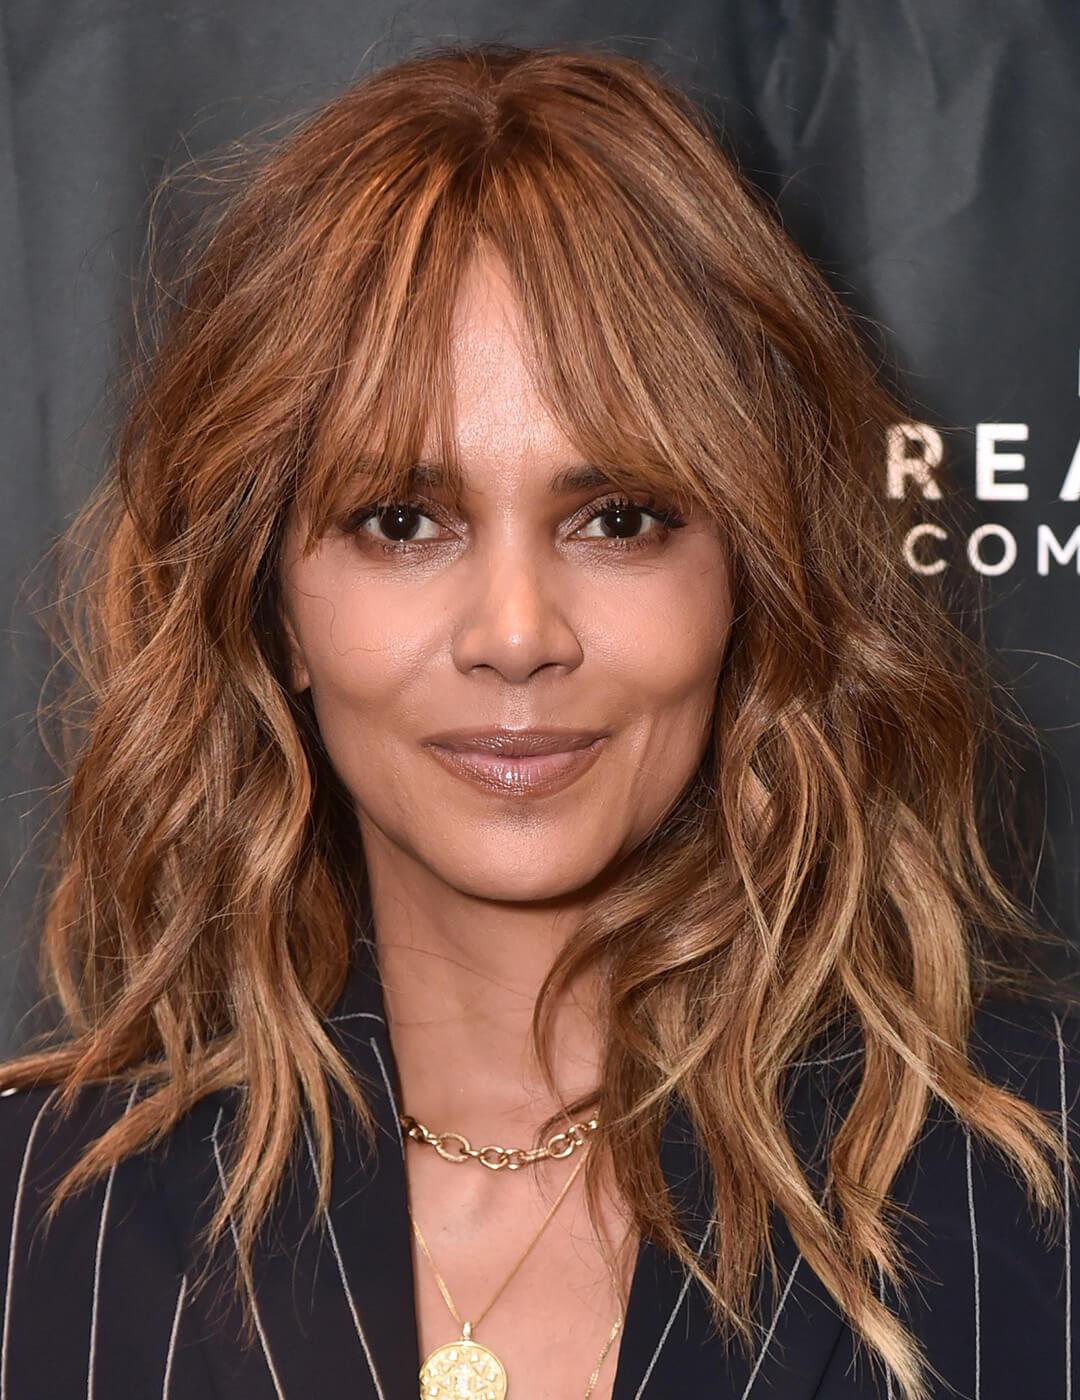 A photo of Halle Berry with dark blonde highlight extentions wearing a black coat with white stripes and gold chain necklace